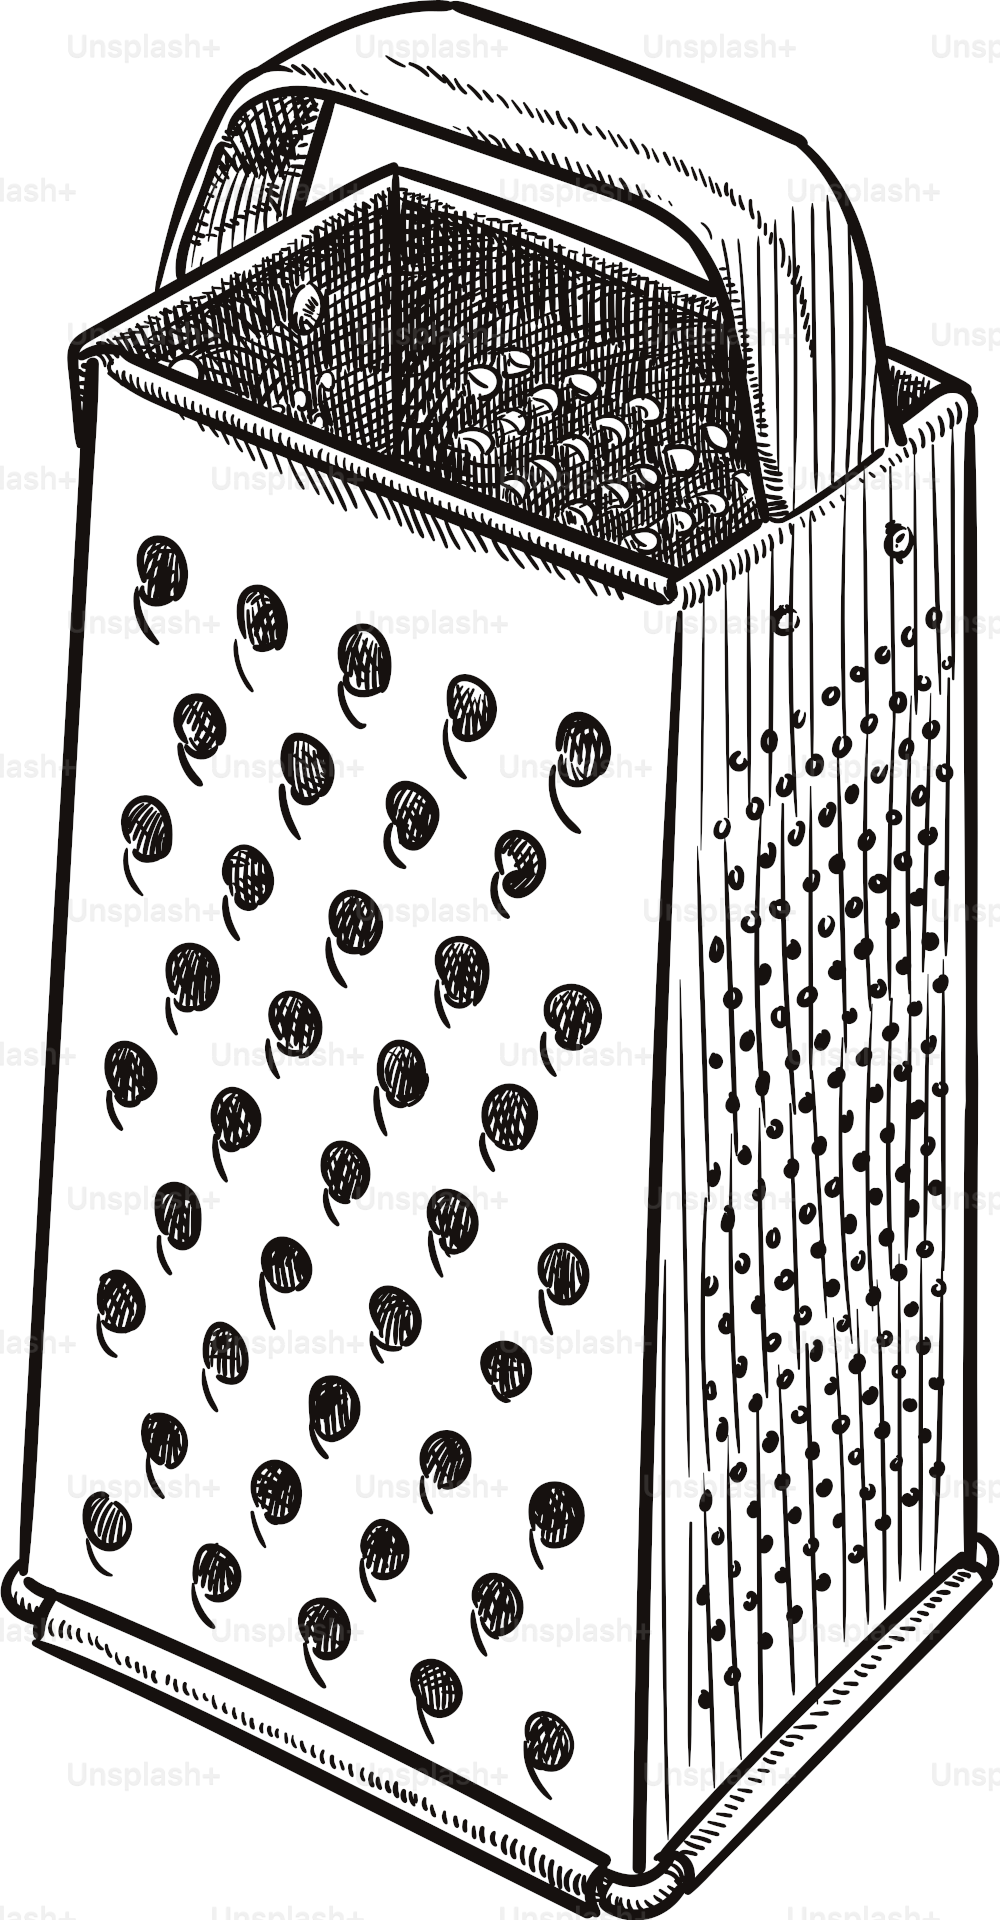 Old style illustration of a metal grater